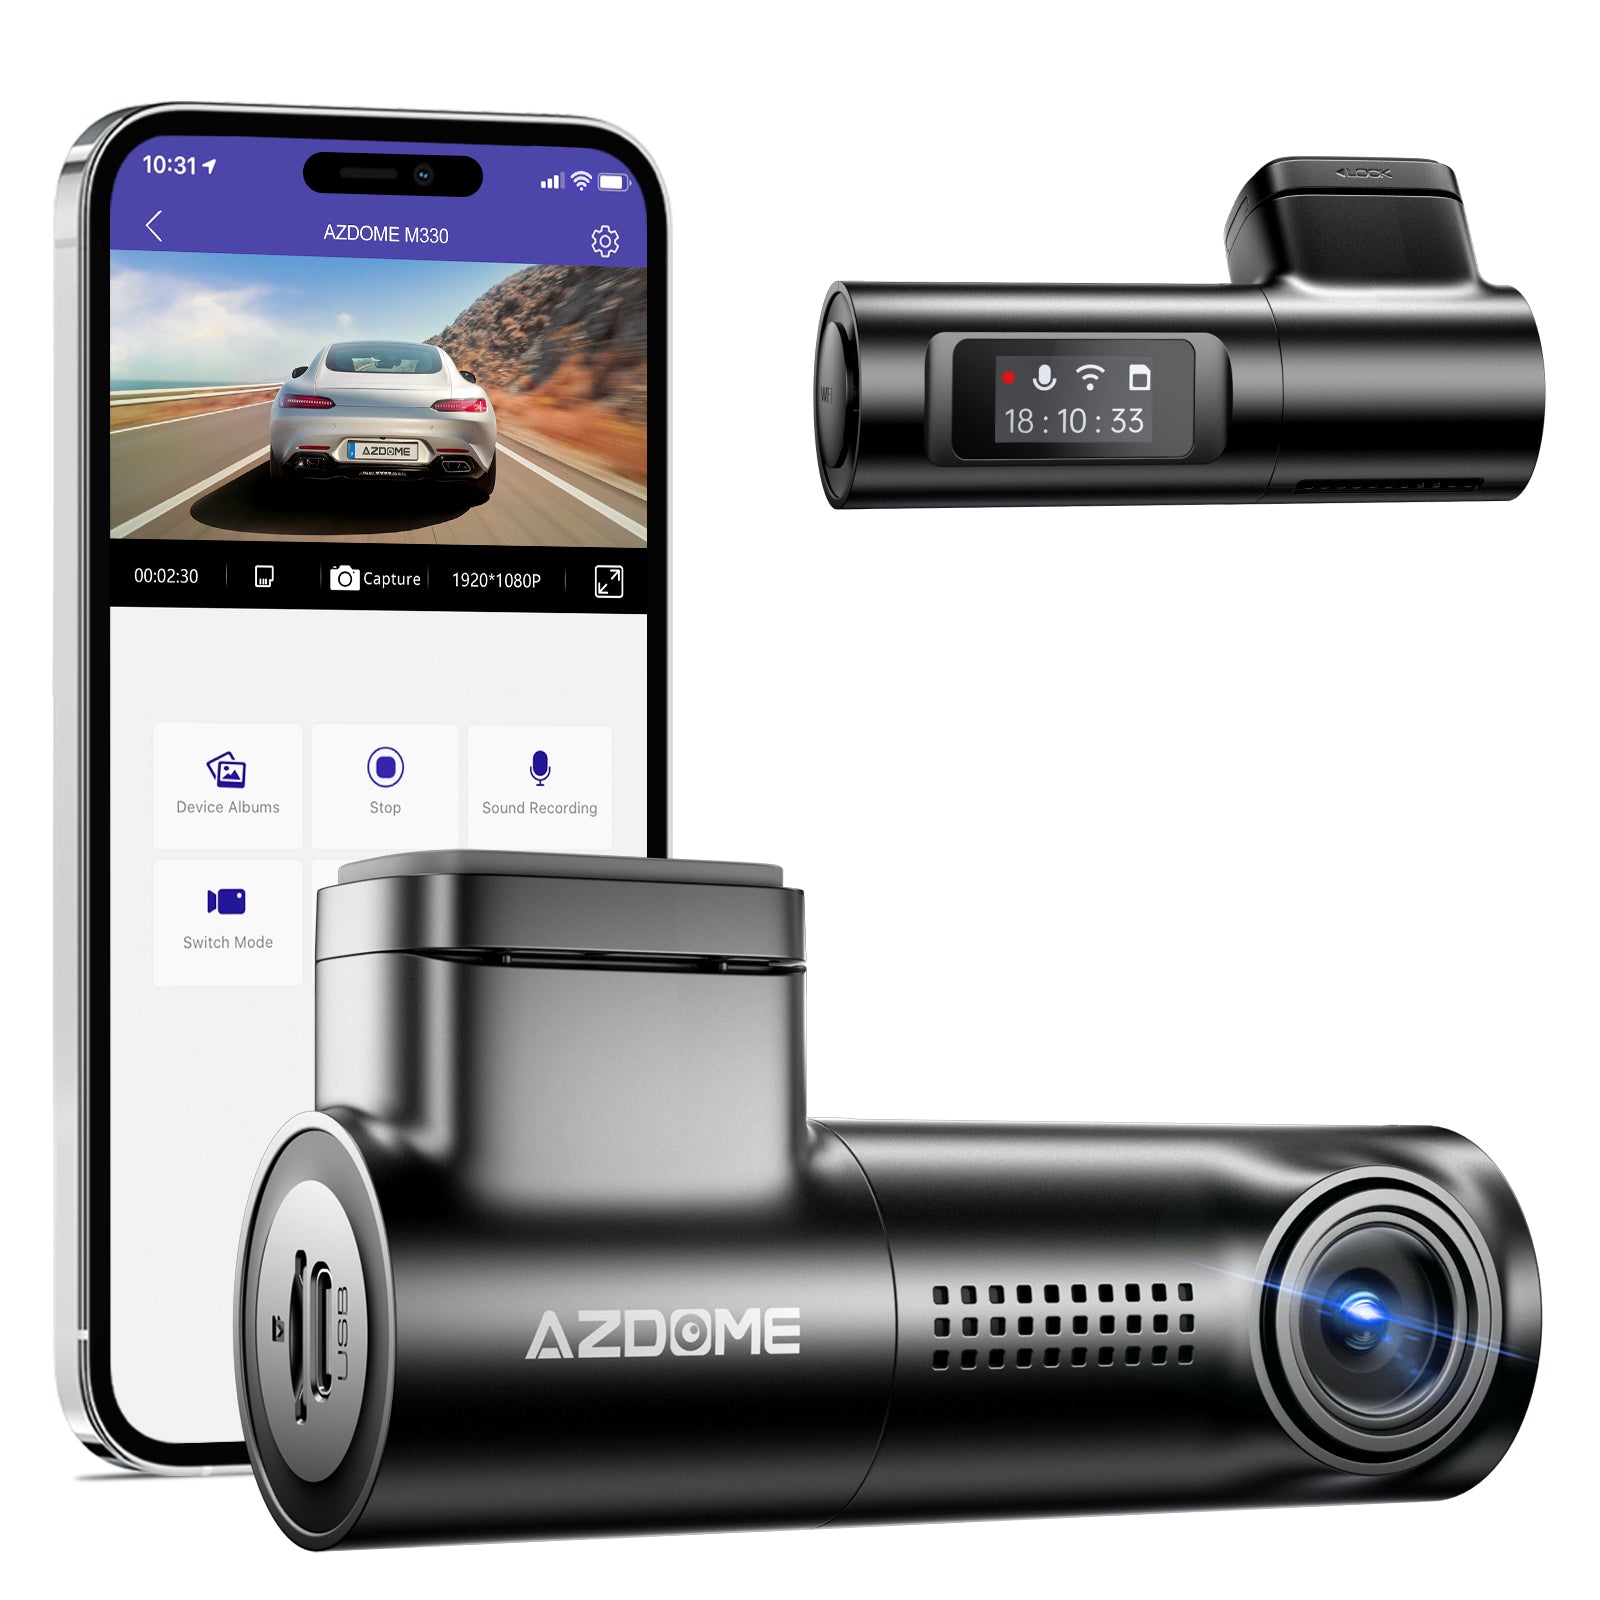 AZDOME M330 1080P FHD Dash Cam, Built-in WiFi Dashcams for Cars